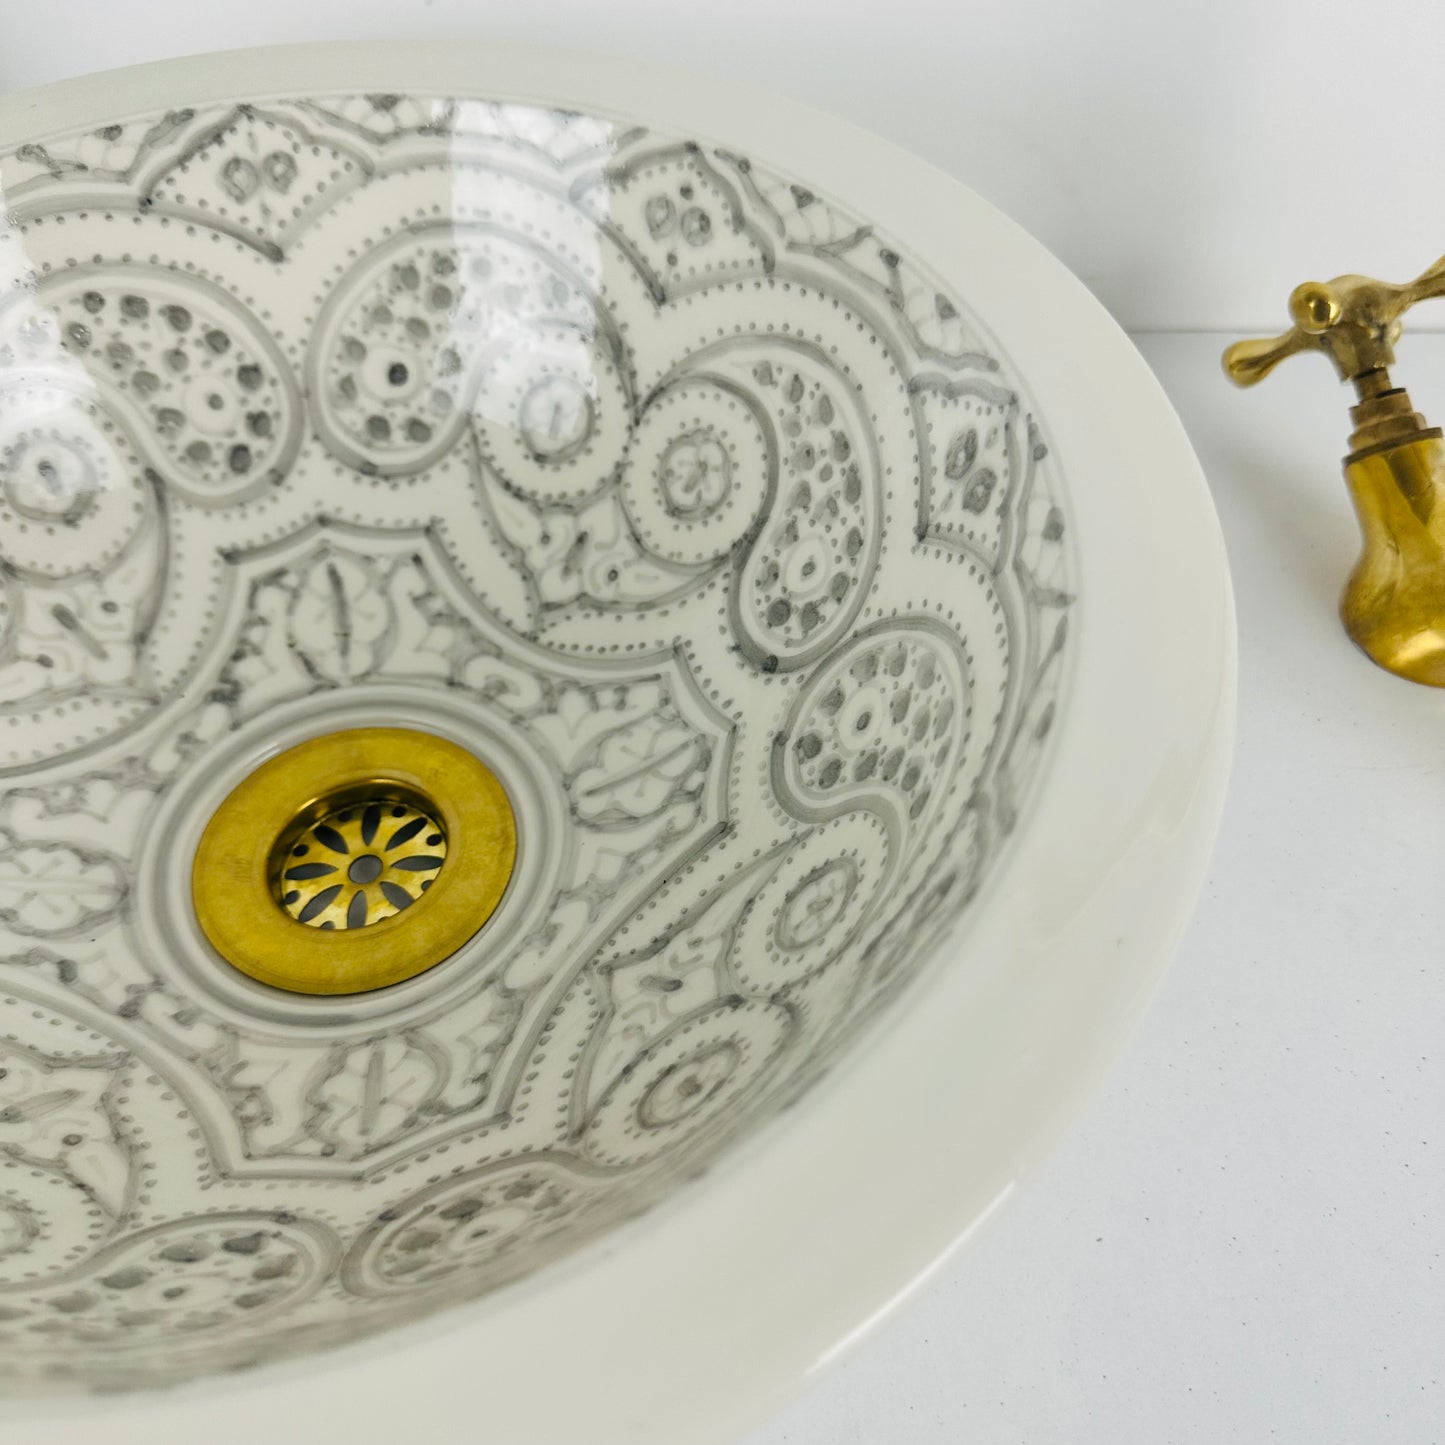 Antique Ash: Handcrafted Ceramic Sink in Vintage Gray Shade